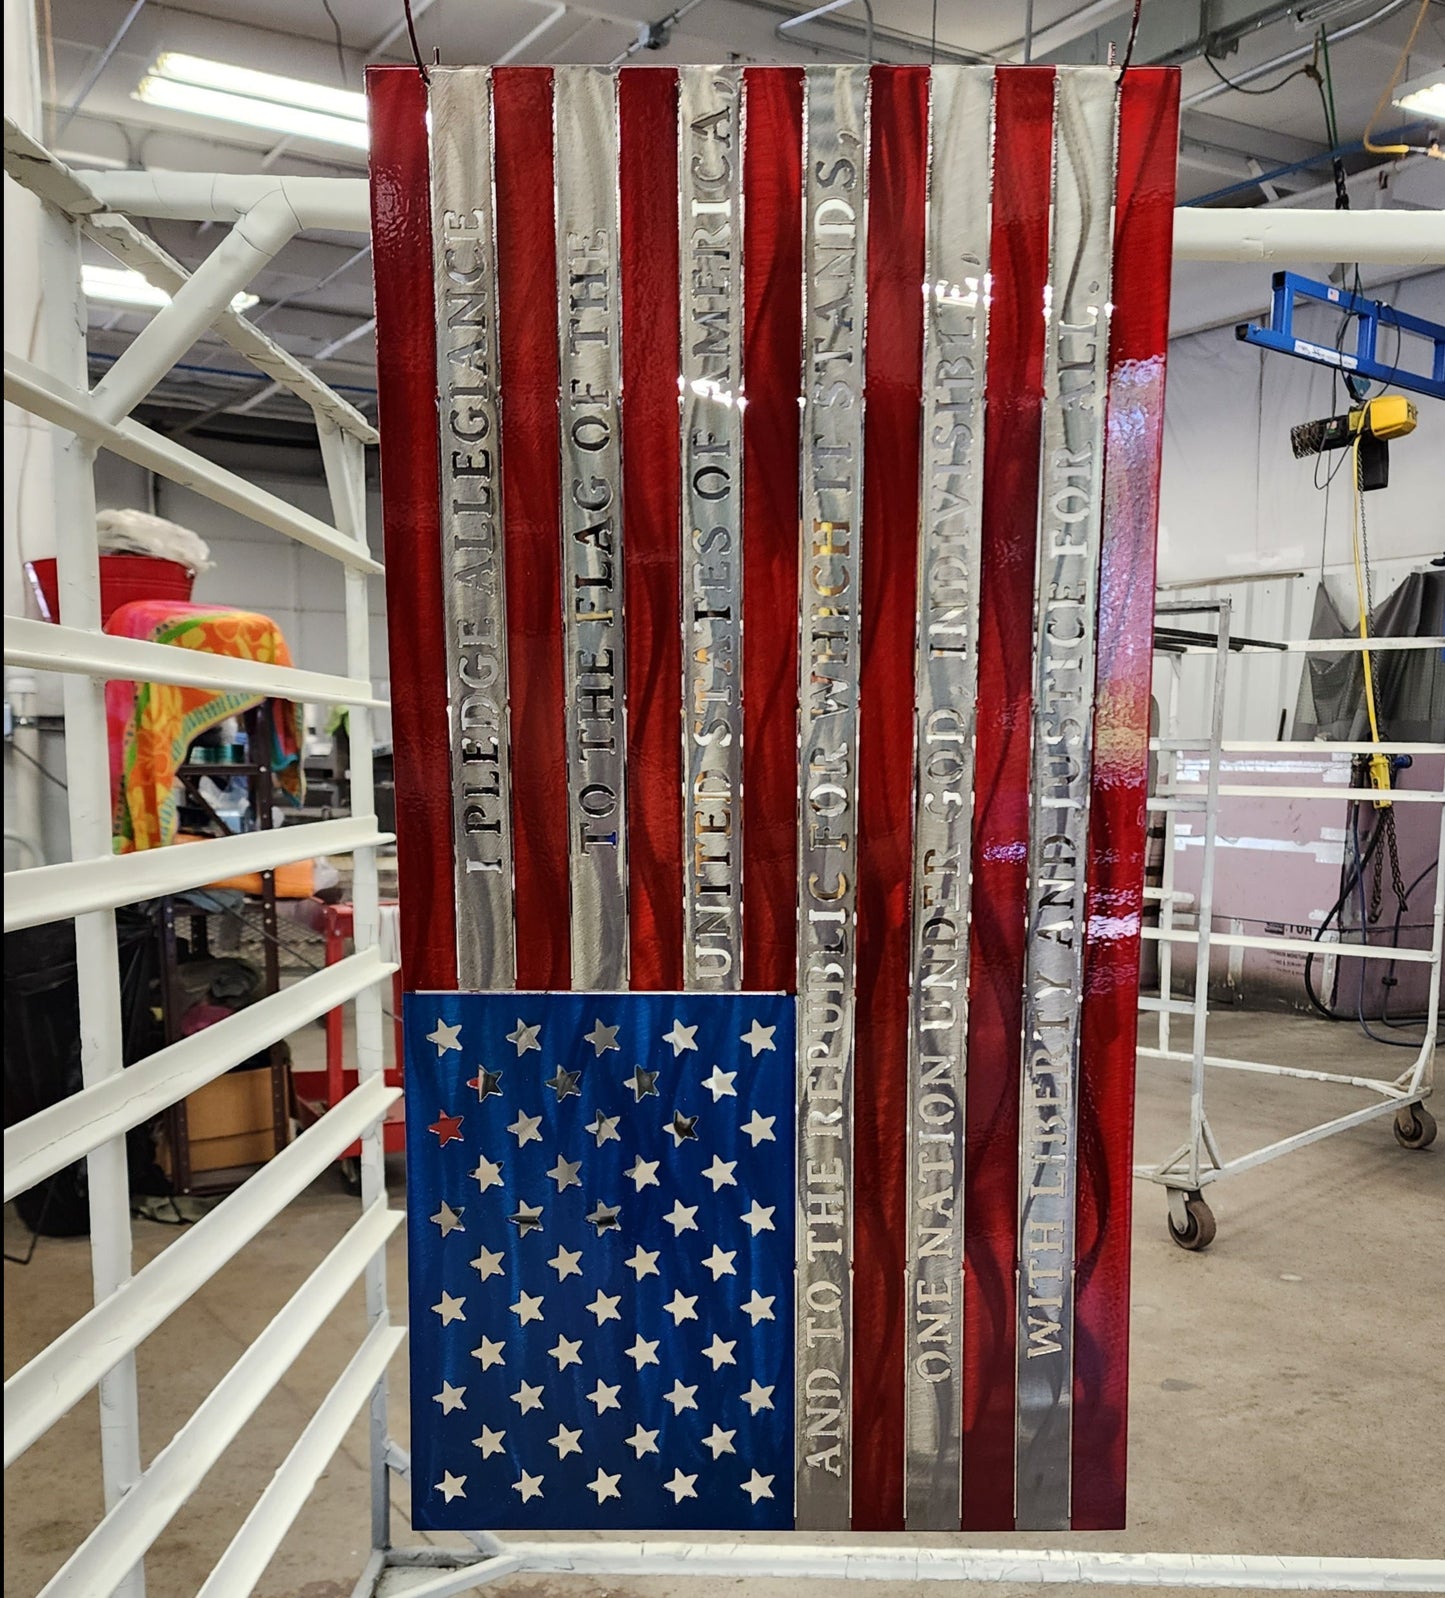 United States of America metal Flag with Pledge of Allegiance